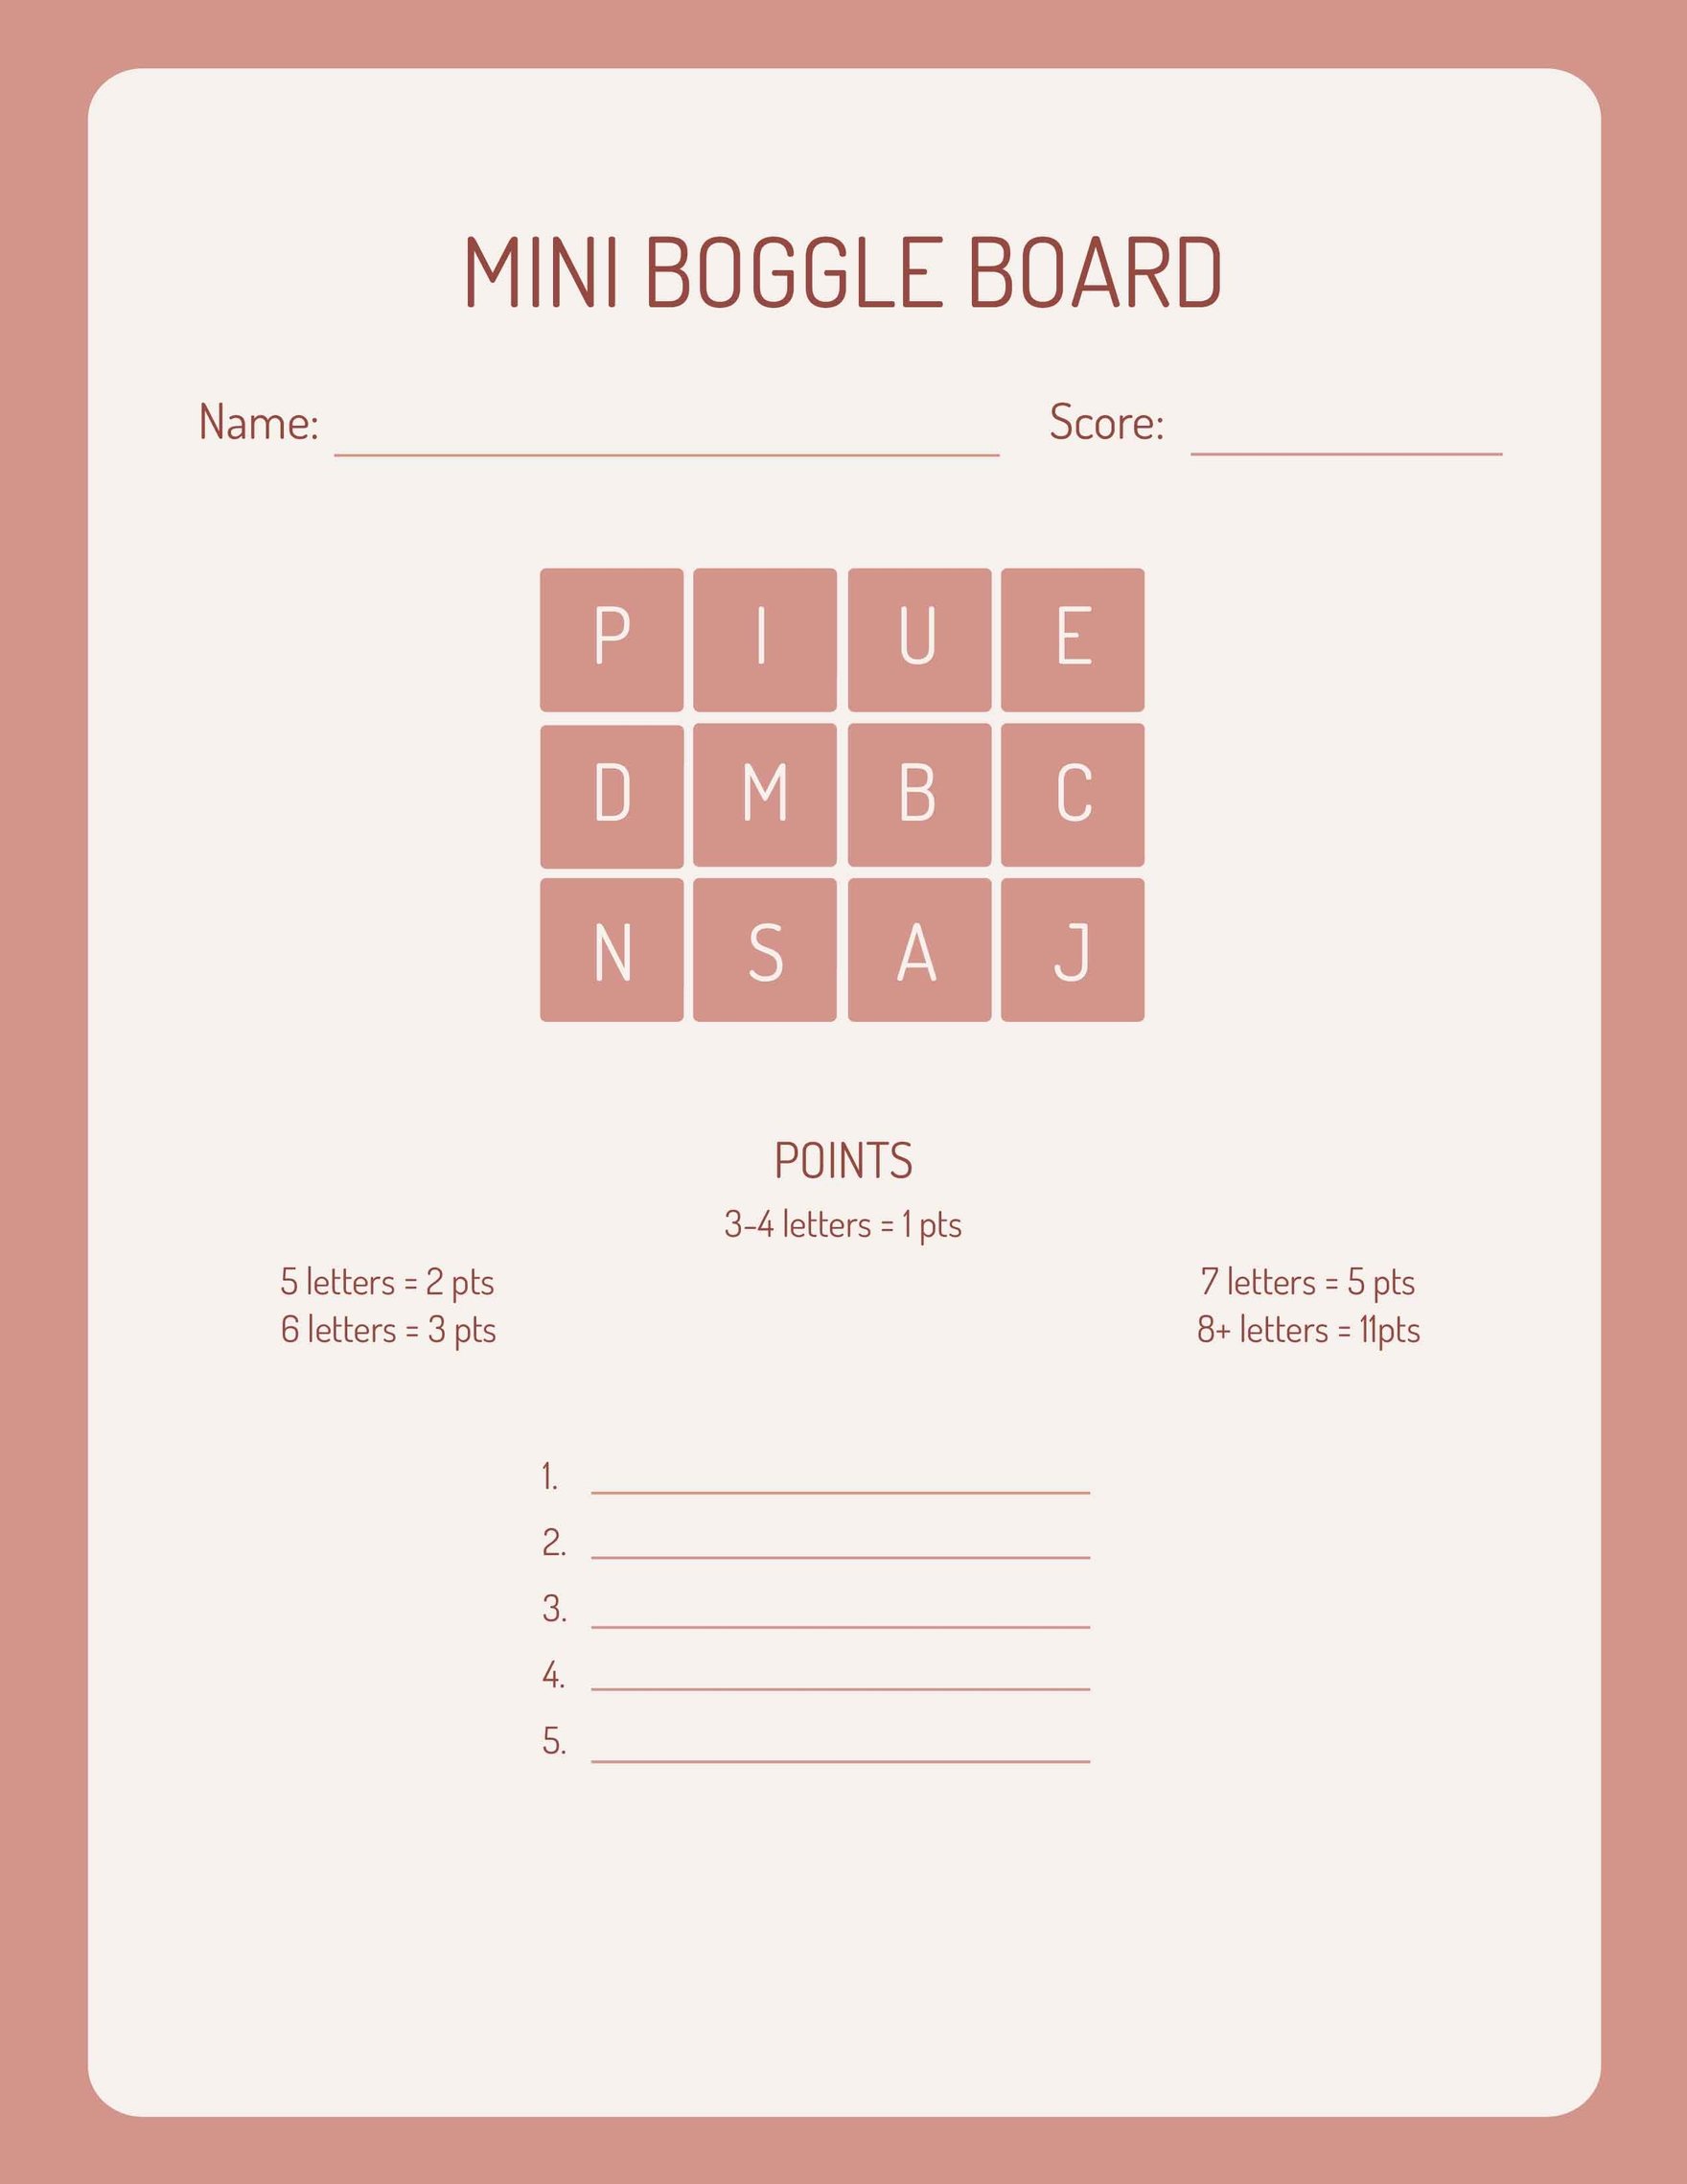 Mini Boggle Board Template in Word, Google Docs, PDF, Apple Pages